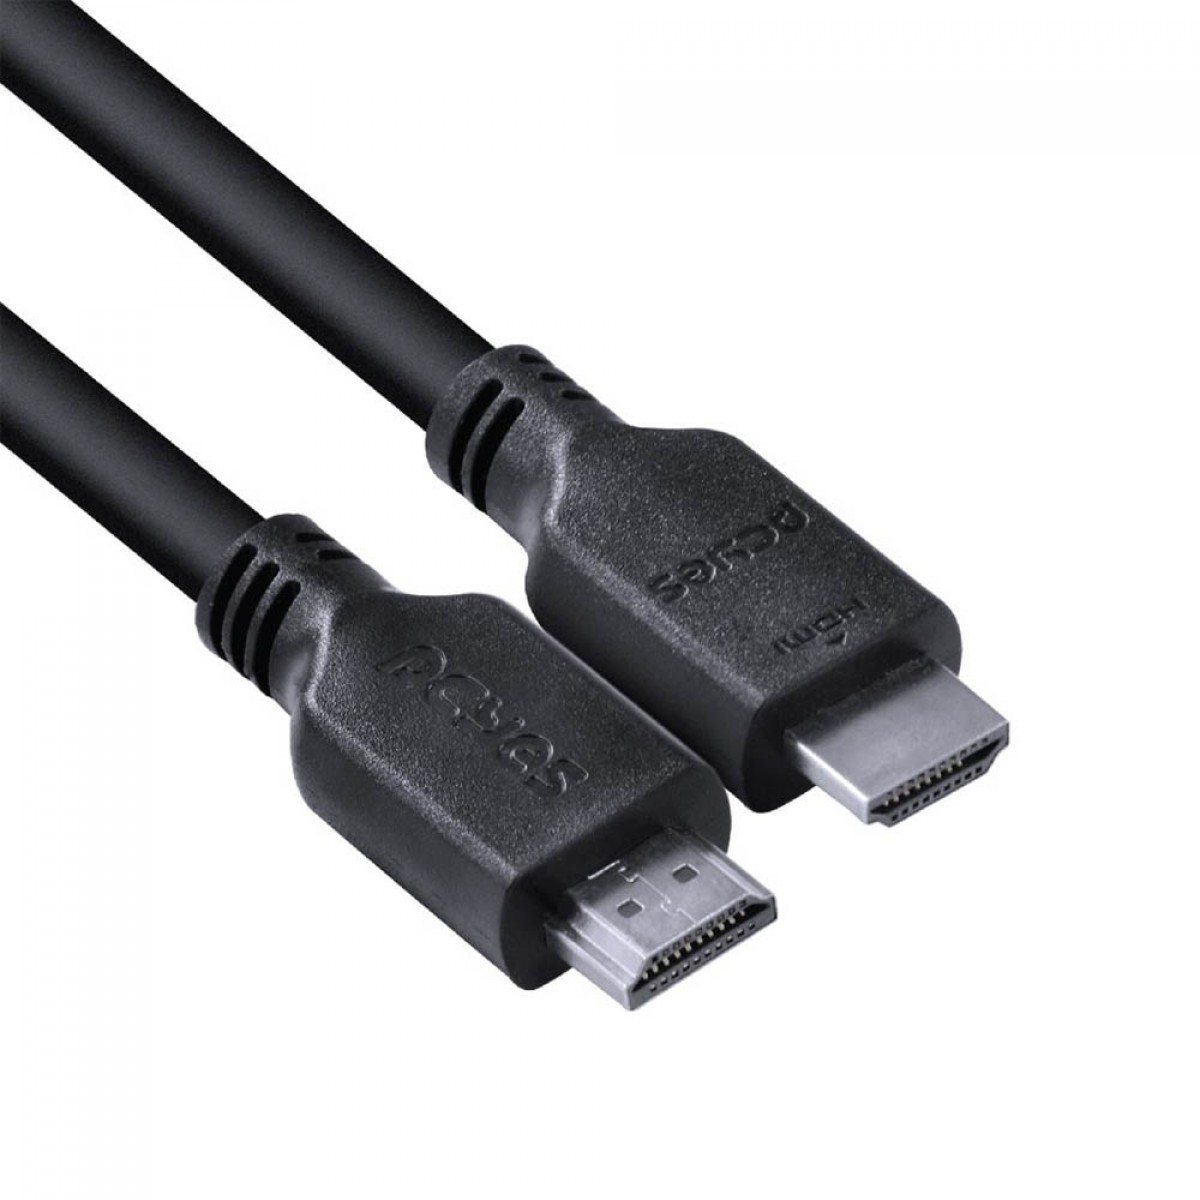 Cabo HDMI 2.0 PCYES, 4k 60Hz, 3m, PHM20-3